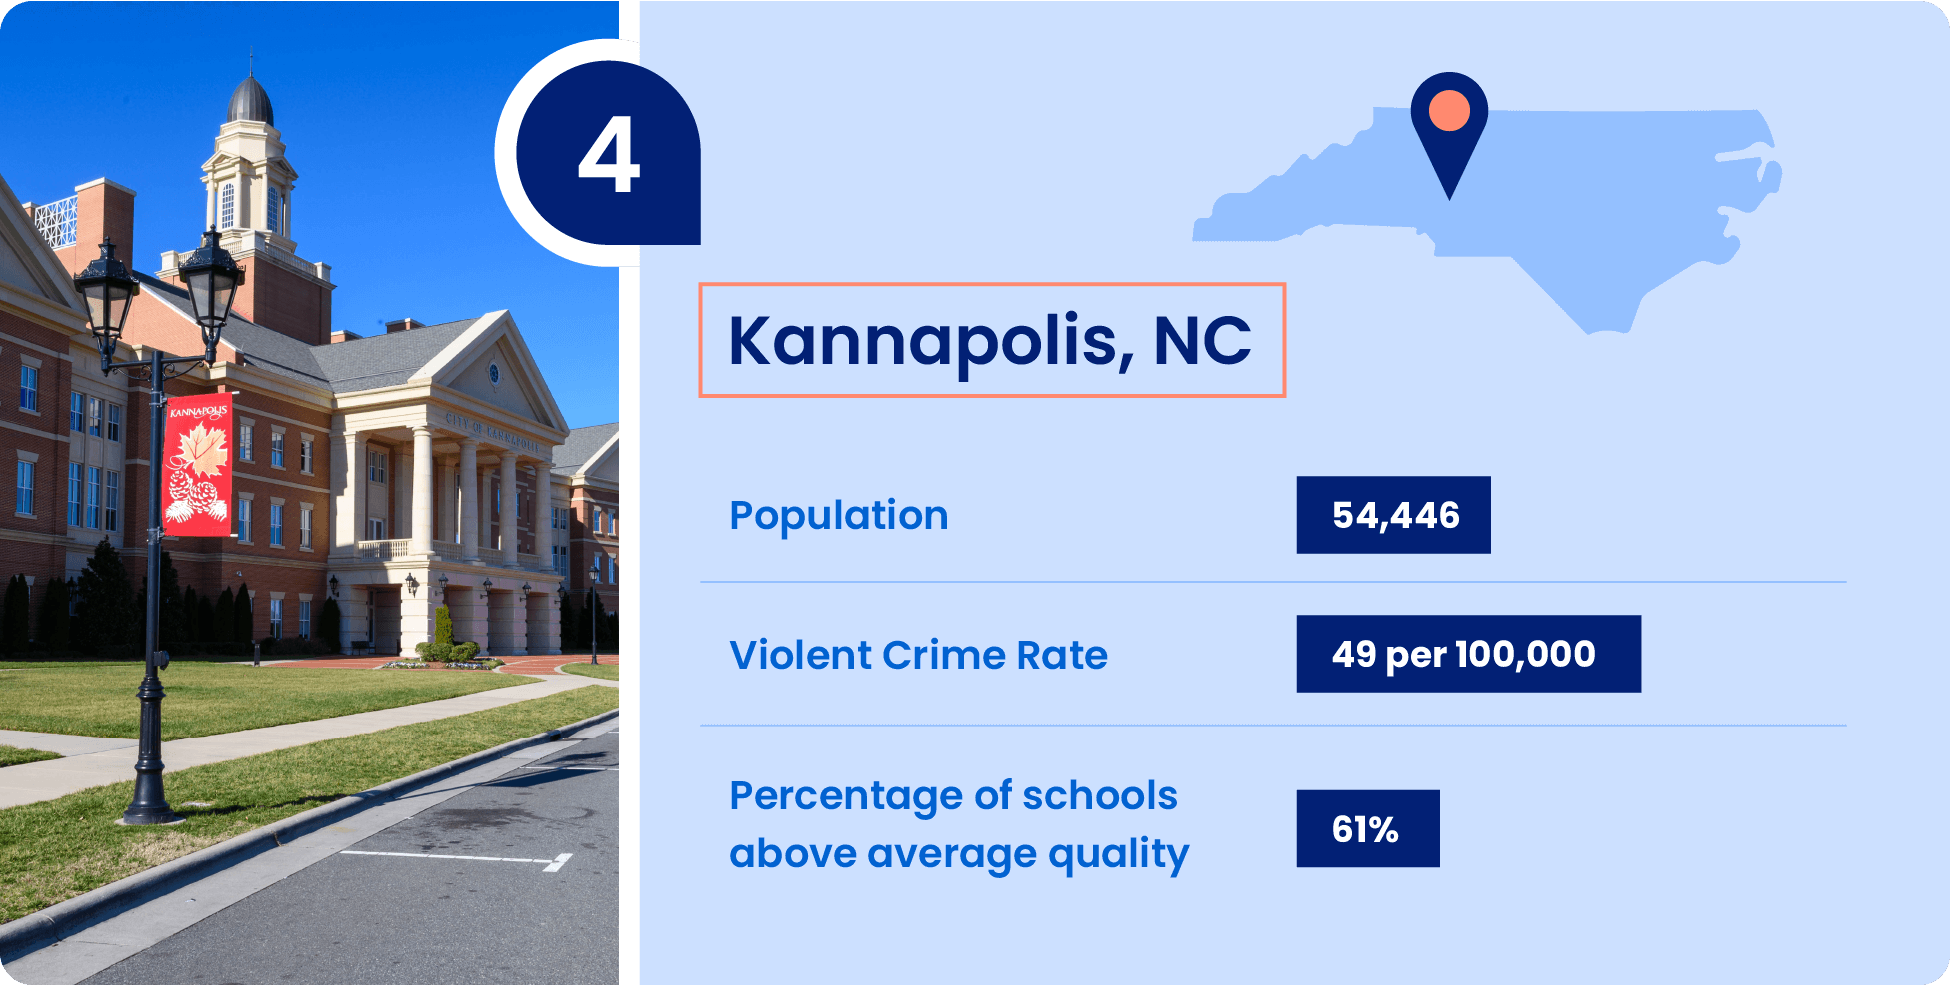 Image shows key information that make Kannapolis, North Carolina a great place to raise a family.